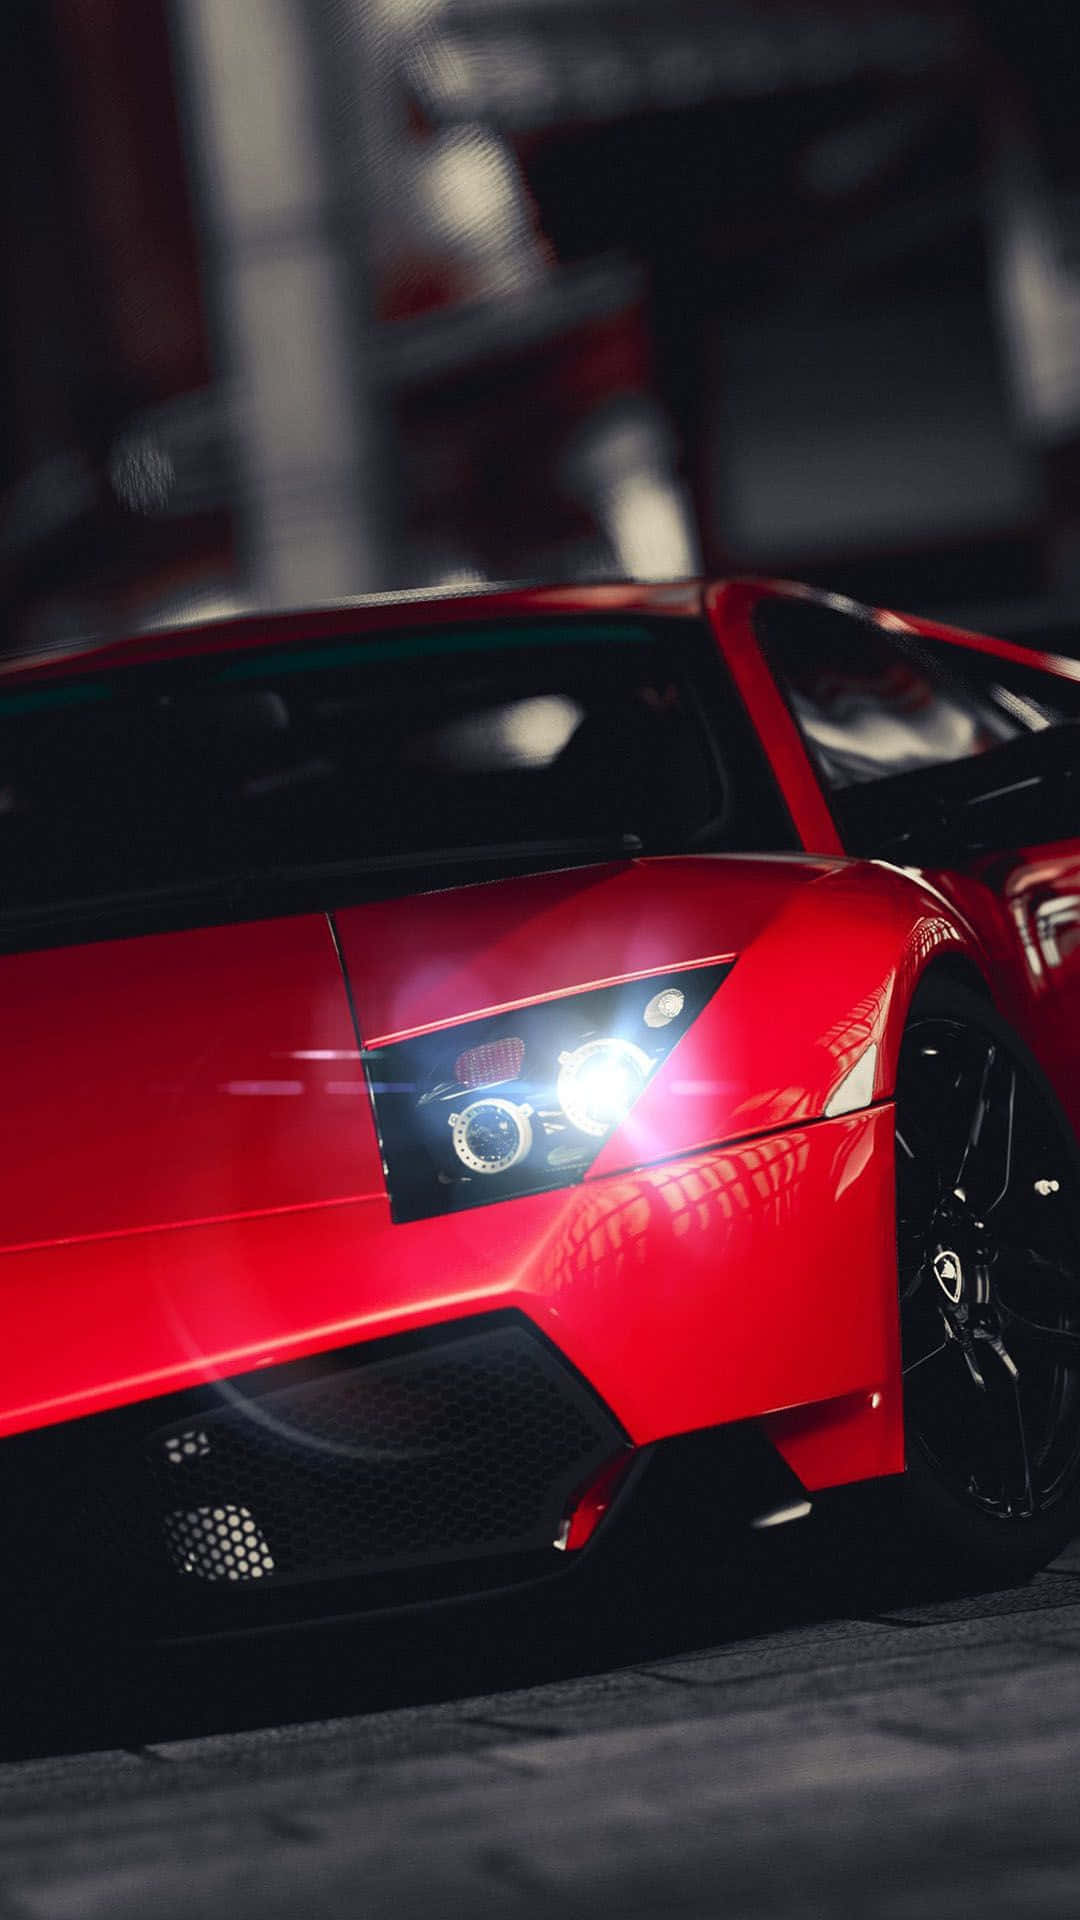 Colorful Red Car in Motion Wallpaper